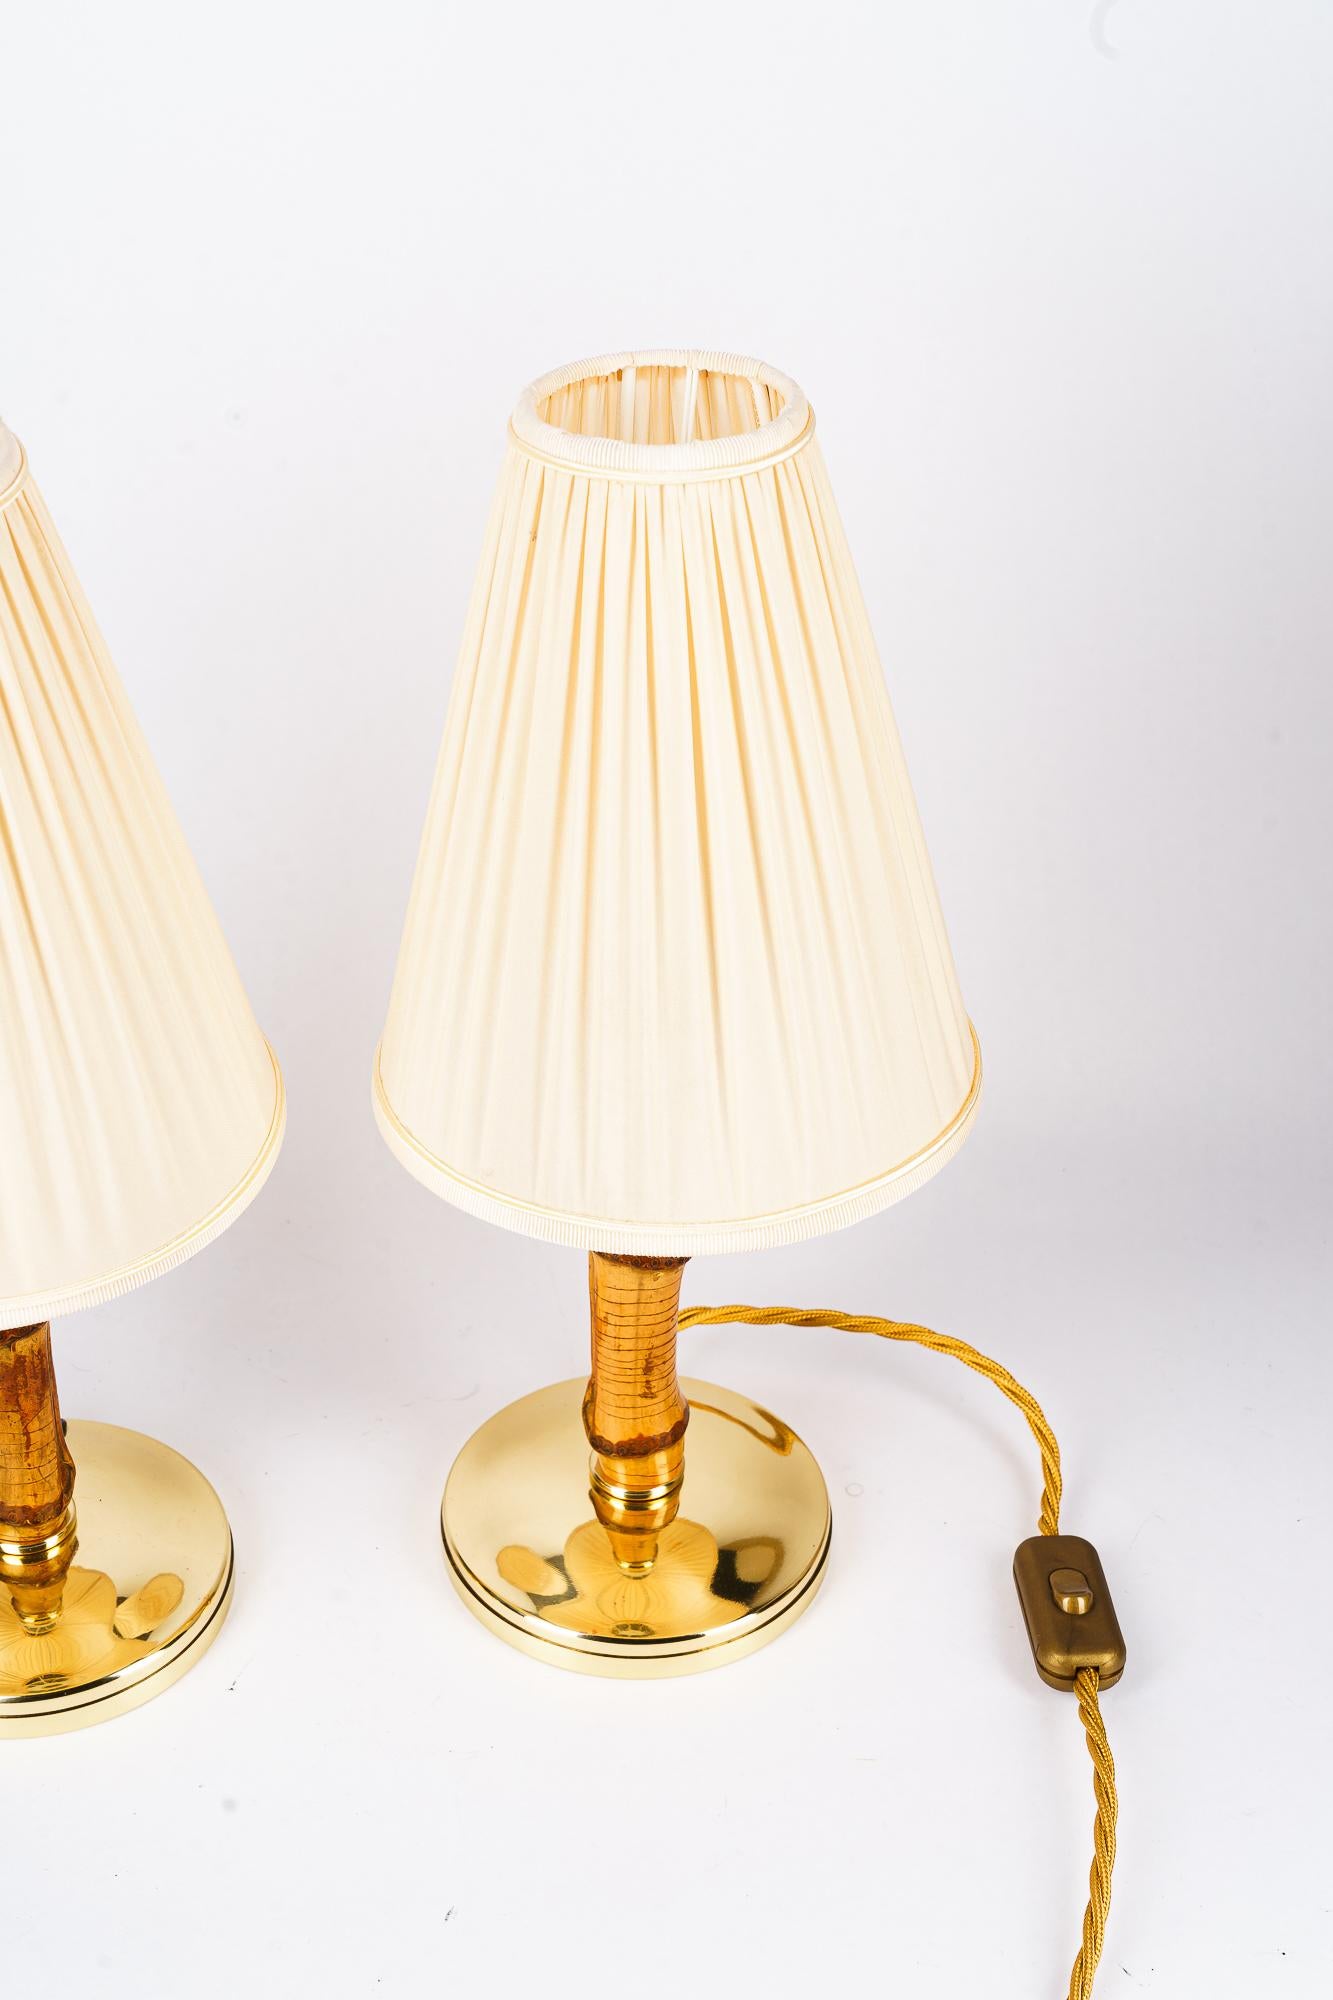 Austrian 2 Rupert Nikoll Bamboo Table Lamps with Fabric Shades Austria Around 1950s For Sale